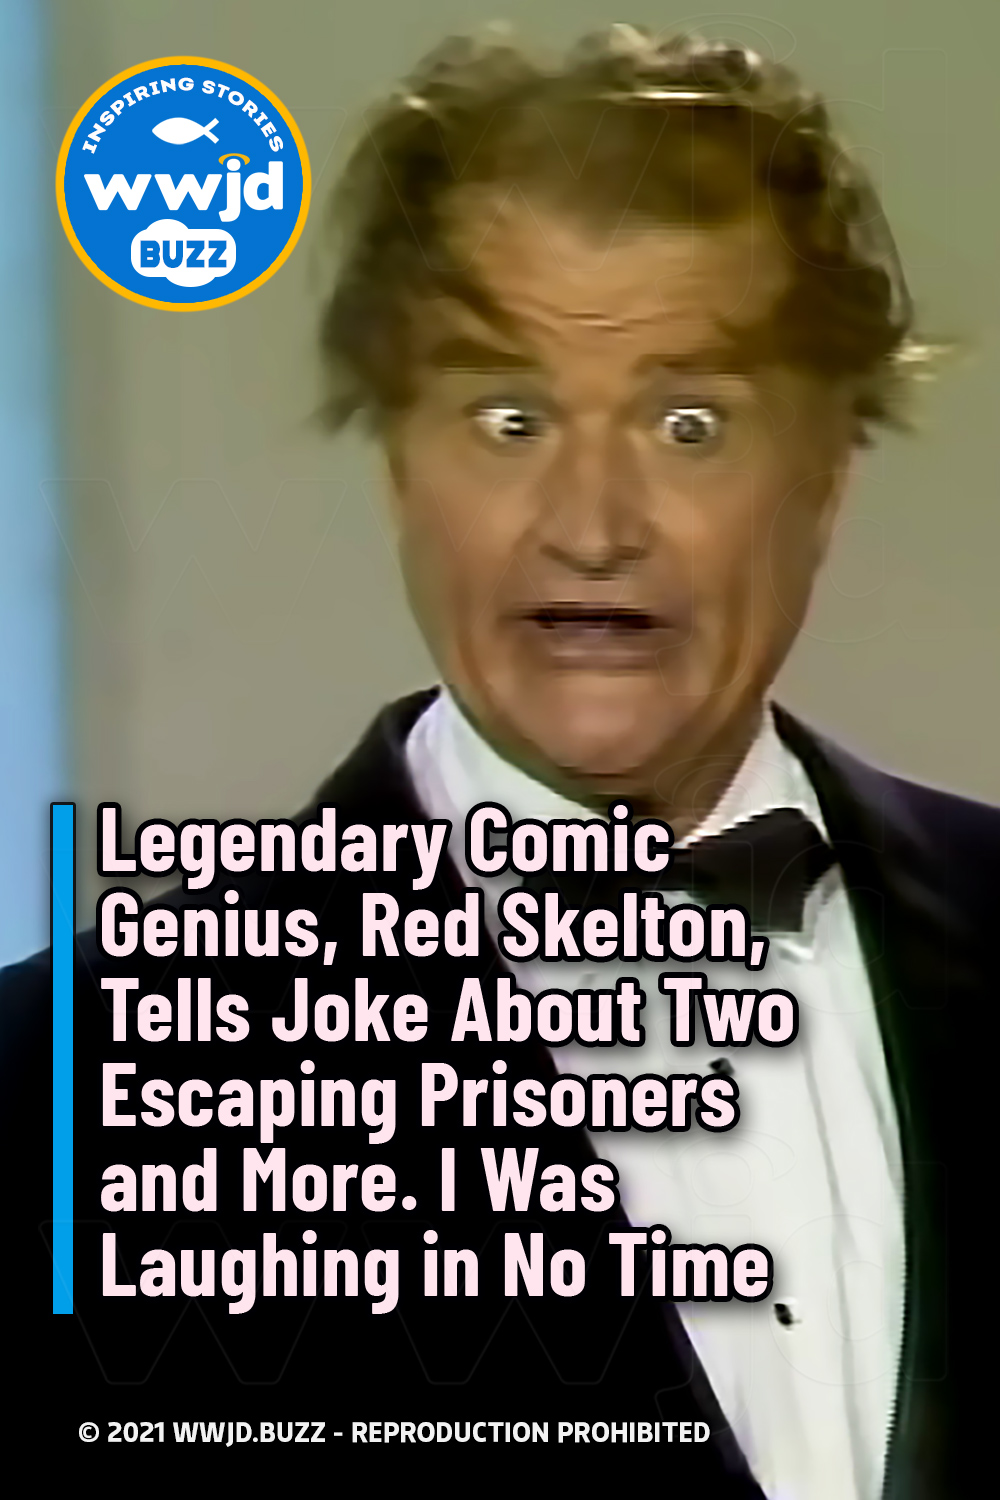 Legendary Comic Genius, Red Skelton, Tells Joke About Two Escaping Prisoners and More. I Was Laughing in No Time